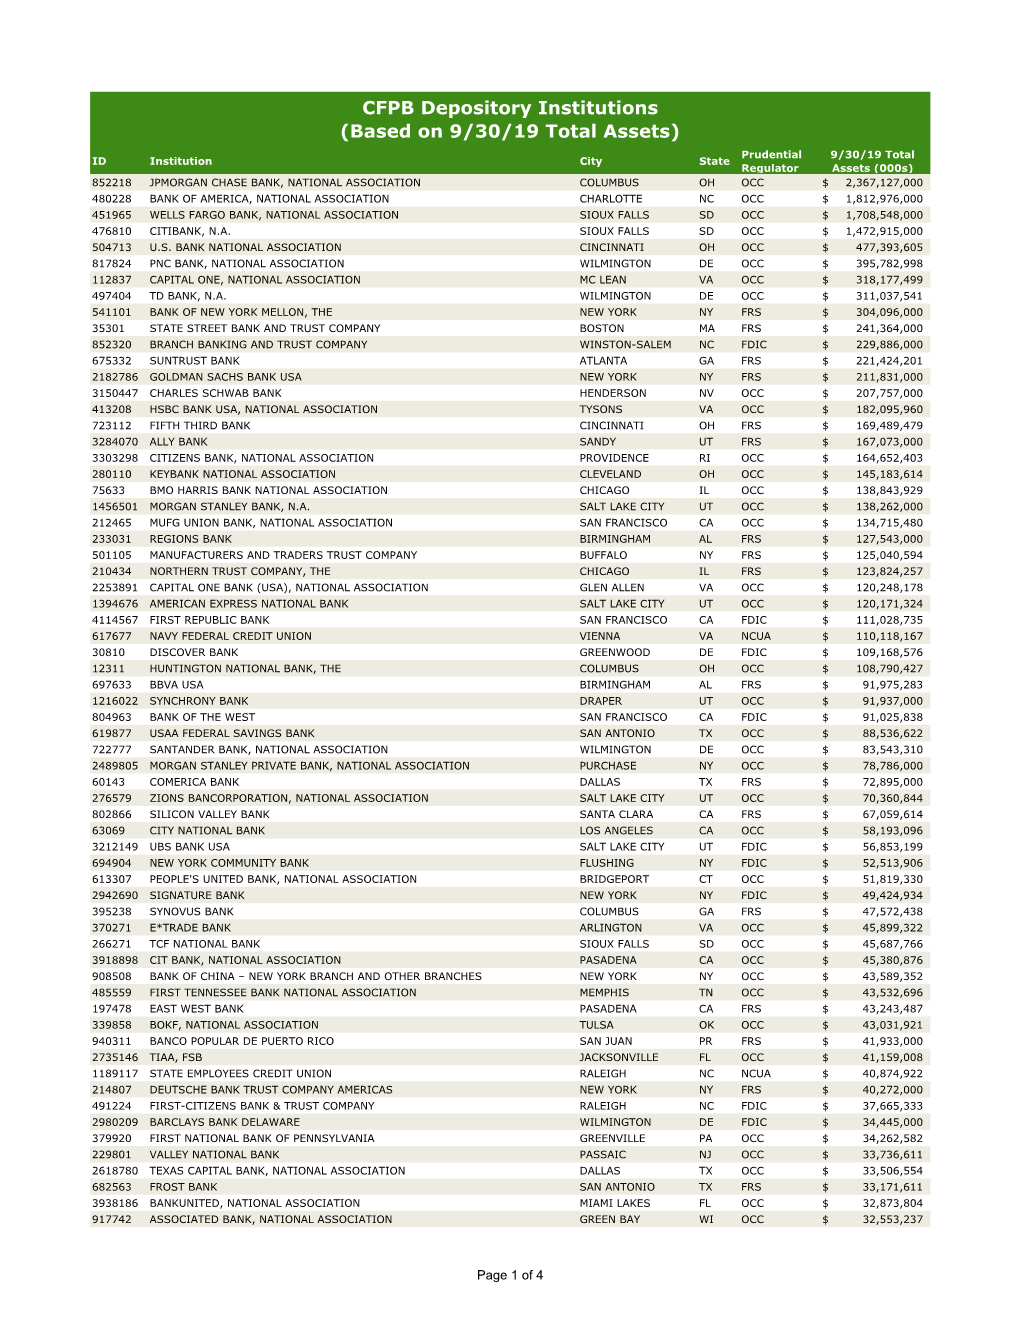 CFPB Depository Institutions (Based on 9/30/19 Total Assets)